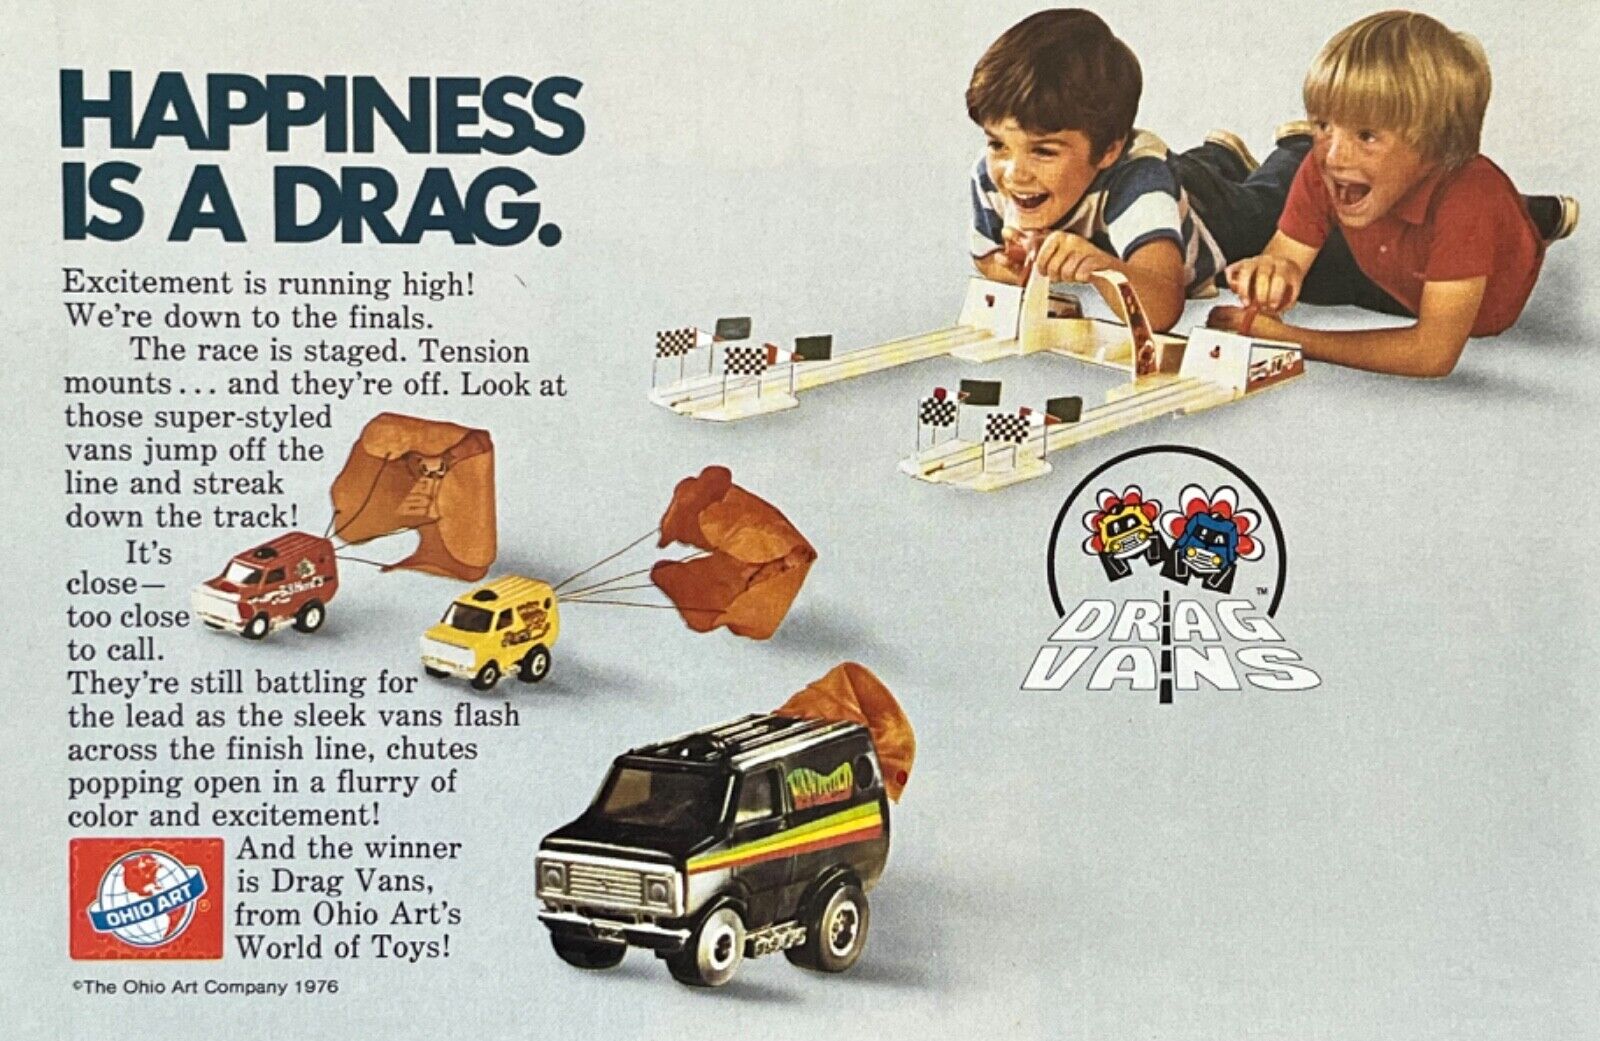 The 1976 Ohio Art’s World of Toys “Drag Vans” Happiness Is A Drag